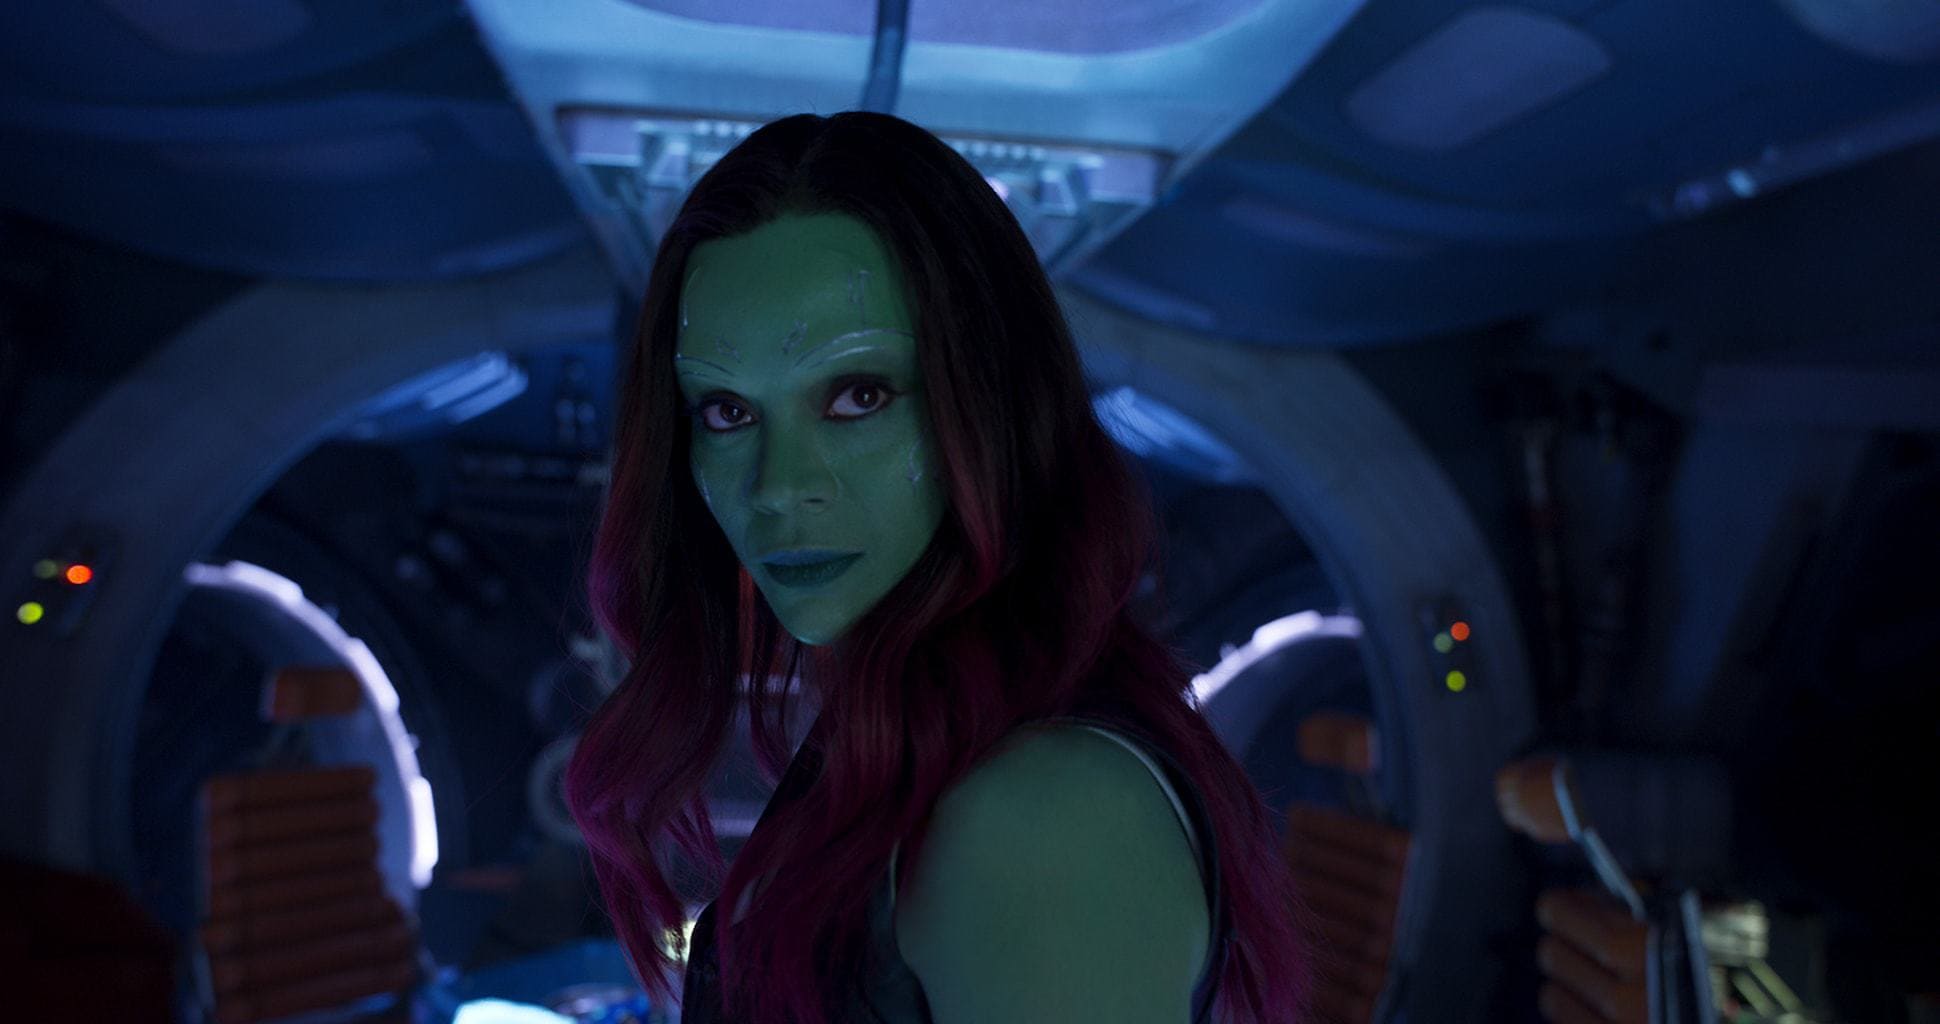 Sitting a foot away from Gamora, in full make-up and costume, was one of the best experiences of my life. This chick is a serious badass; fit, gorgeous, and an attitude to match.